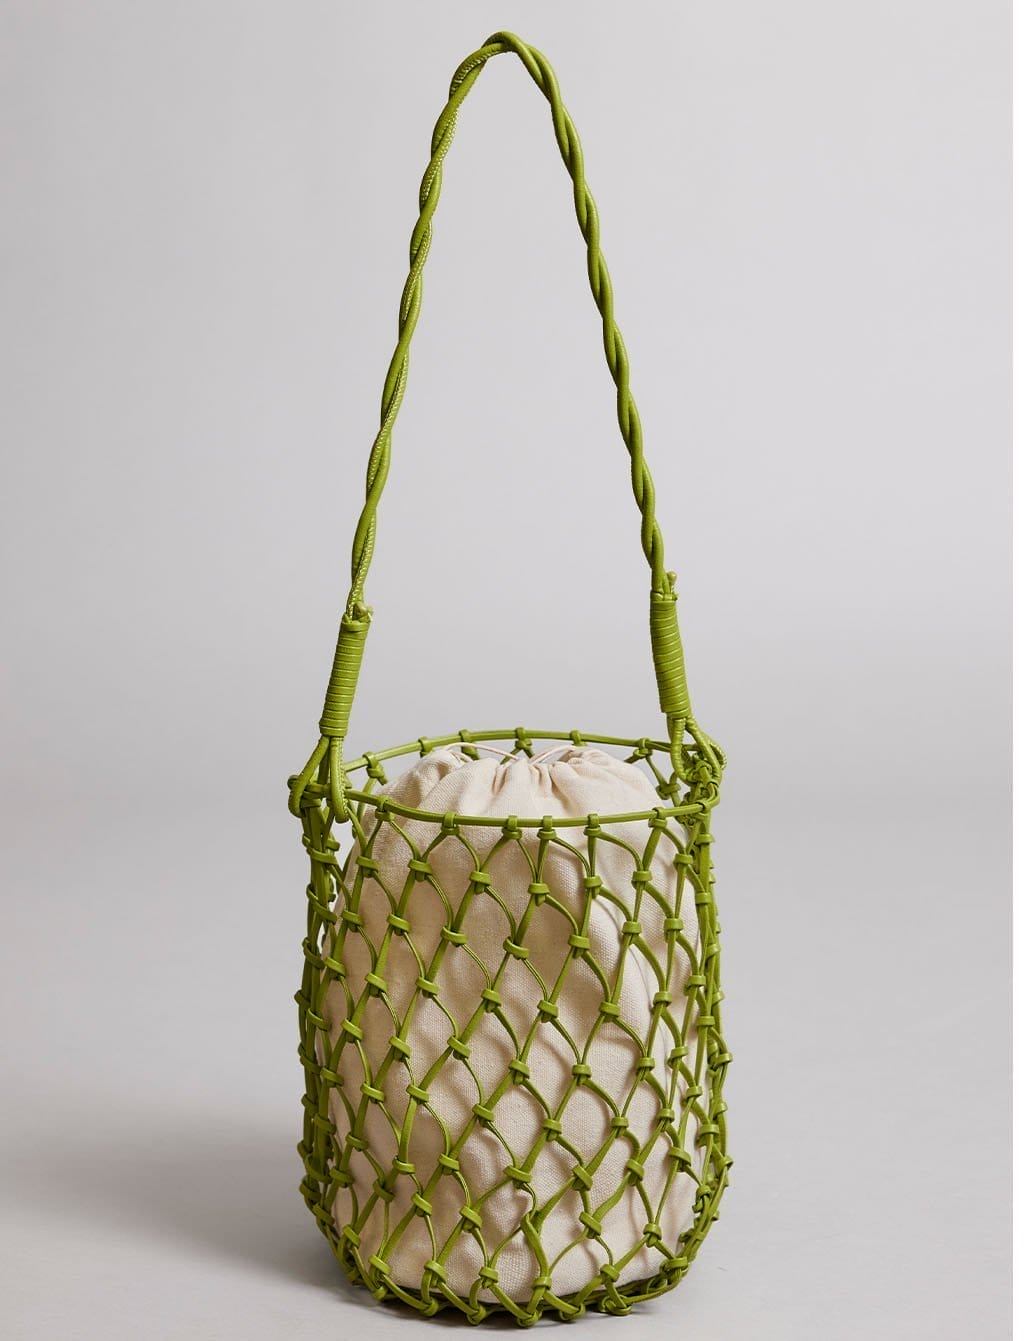 Featuring the Mesh Tote Bag in Lime Green